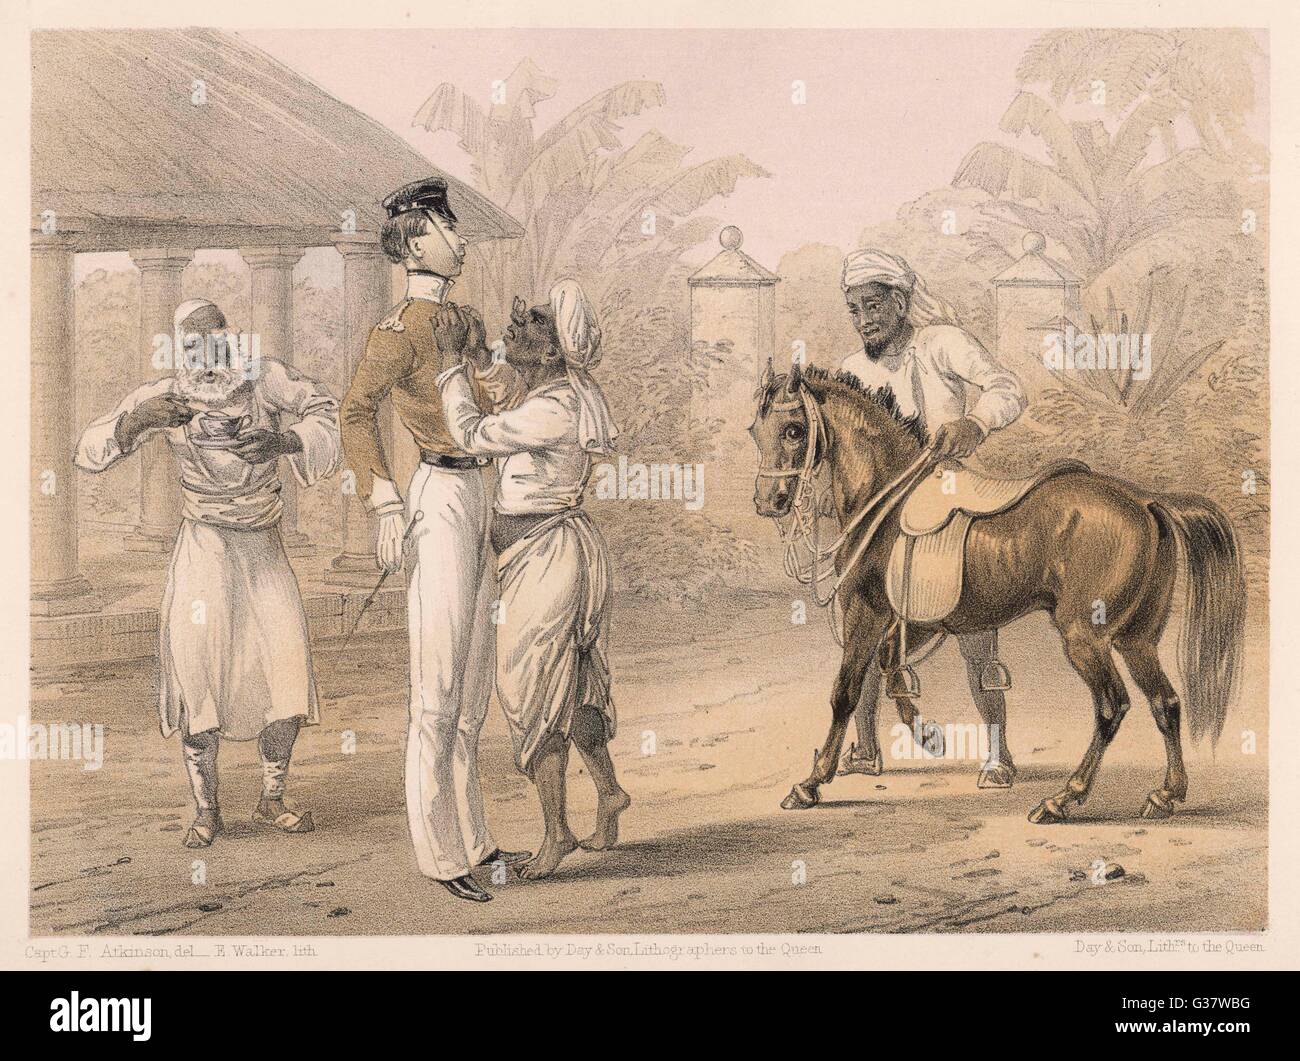 A young officer prepares to go riding in India during the British raj. A servant puts the final touches to his uniform while another holds his pony which is far too small for him, from Curry and Rice (on Forty Plates) by Captain Geo. F. Atkinson.     Date Stock Photo